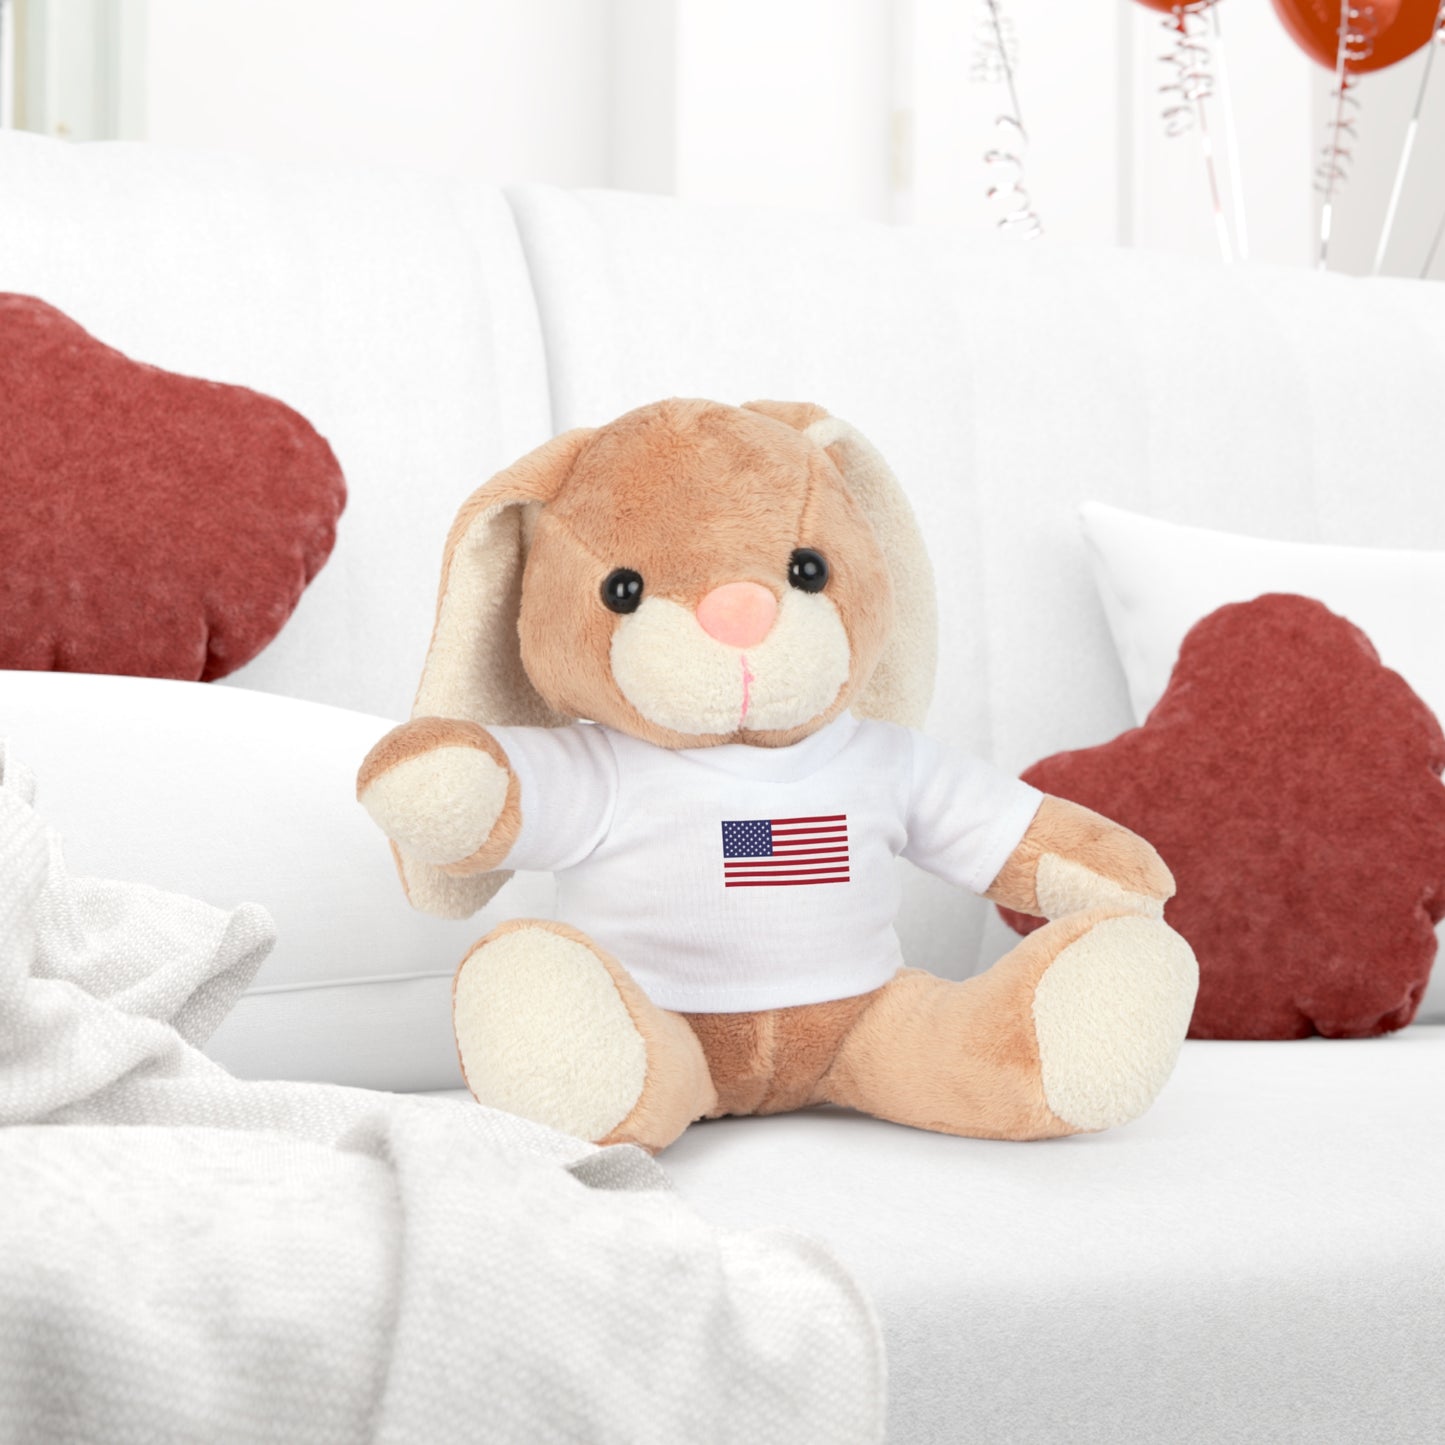 Plush Toy with American Flag Shirt